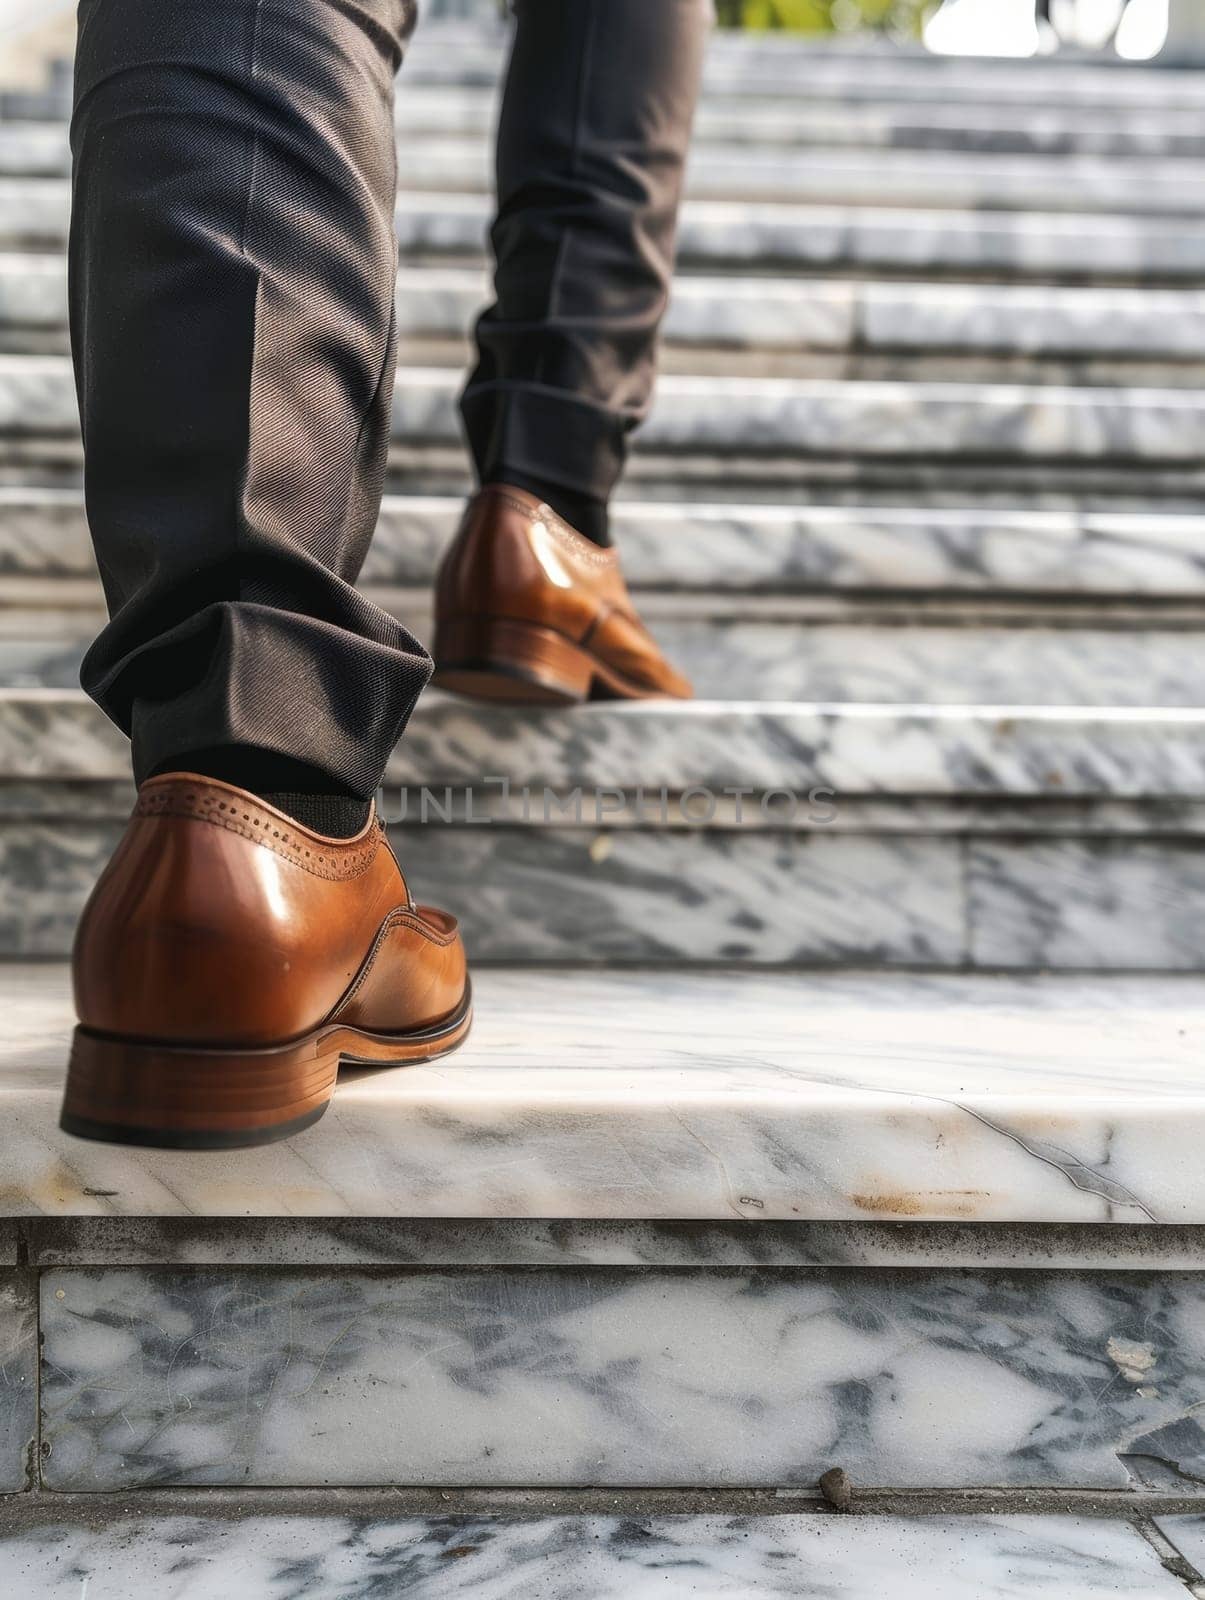 Close-up of a persons feet in polished brown dress shoes, ascending marble steps, capturing a moment of upward mobility. by sfinks